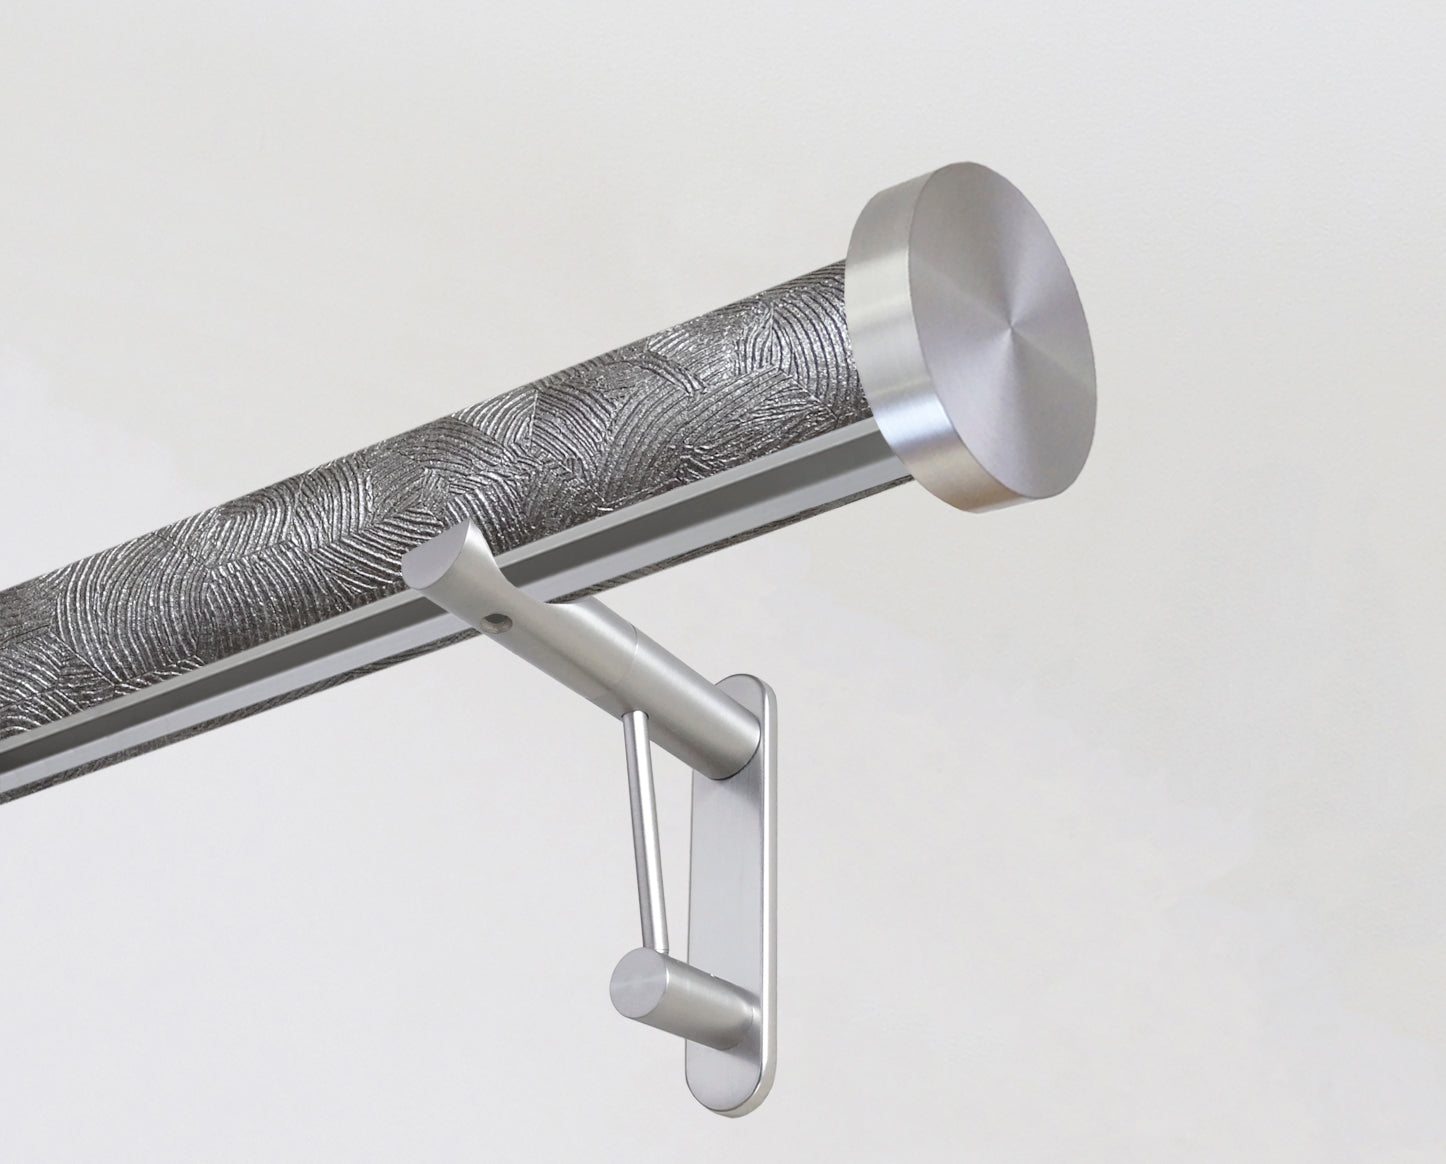 Tracked curtain pole set in dark grey Walcot HouseDesigner wrapped tracked curtain poles in metallic finishes | Walcot House